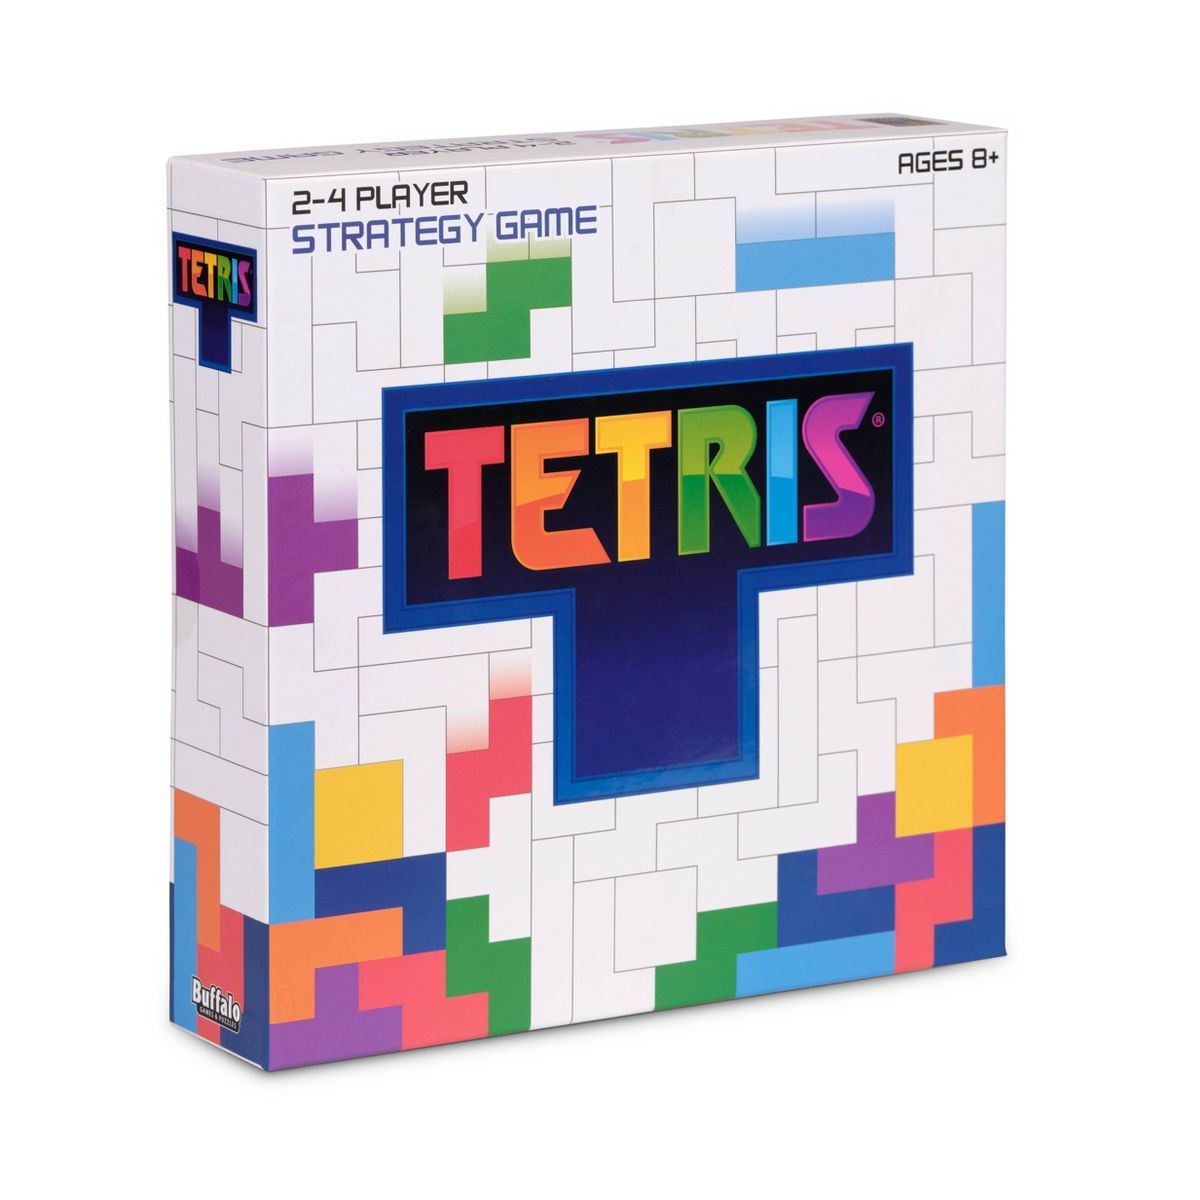 Tetris Head-To-Head Multiplayer Strategy Game | Target